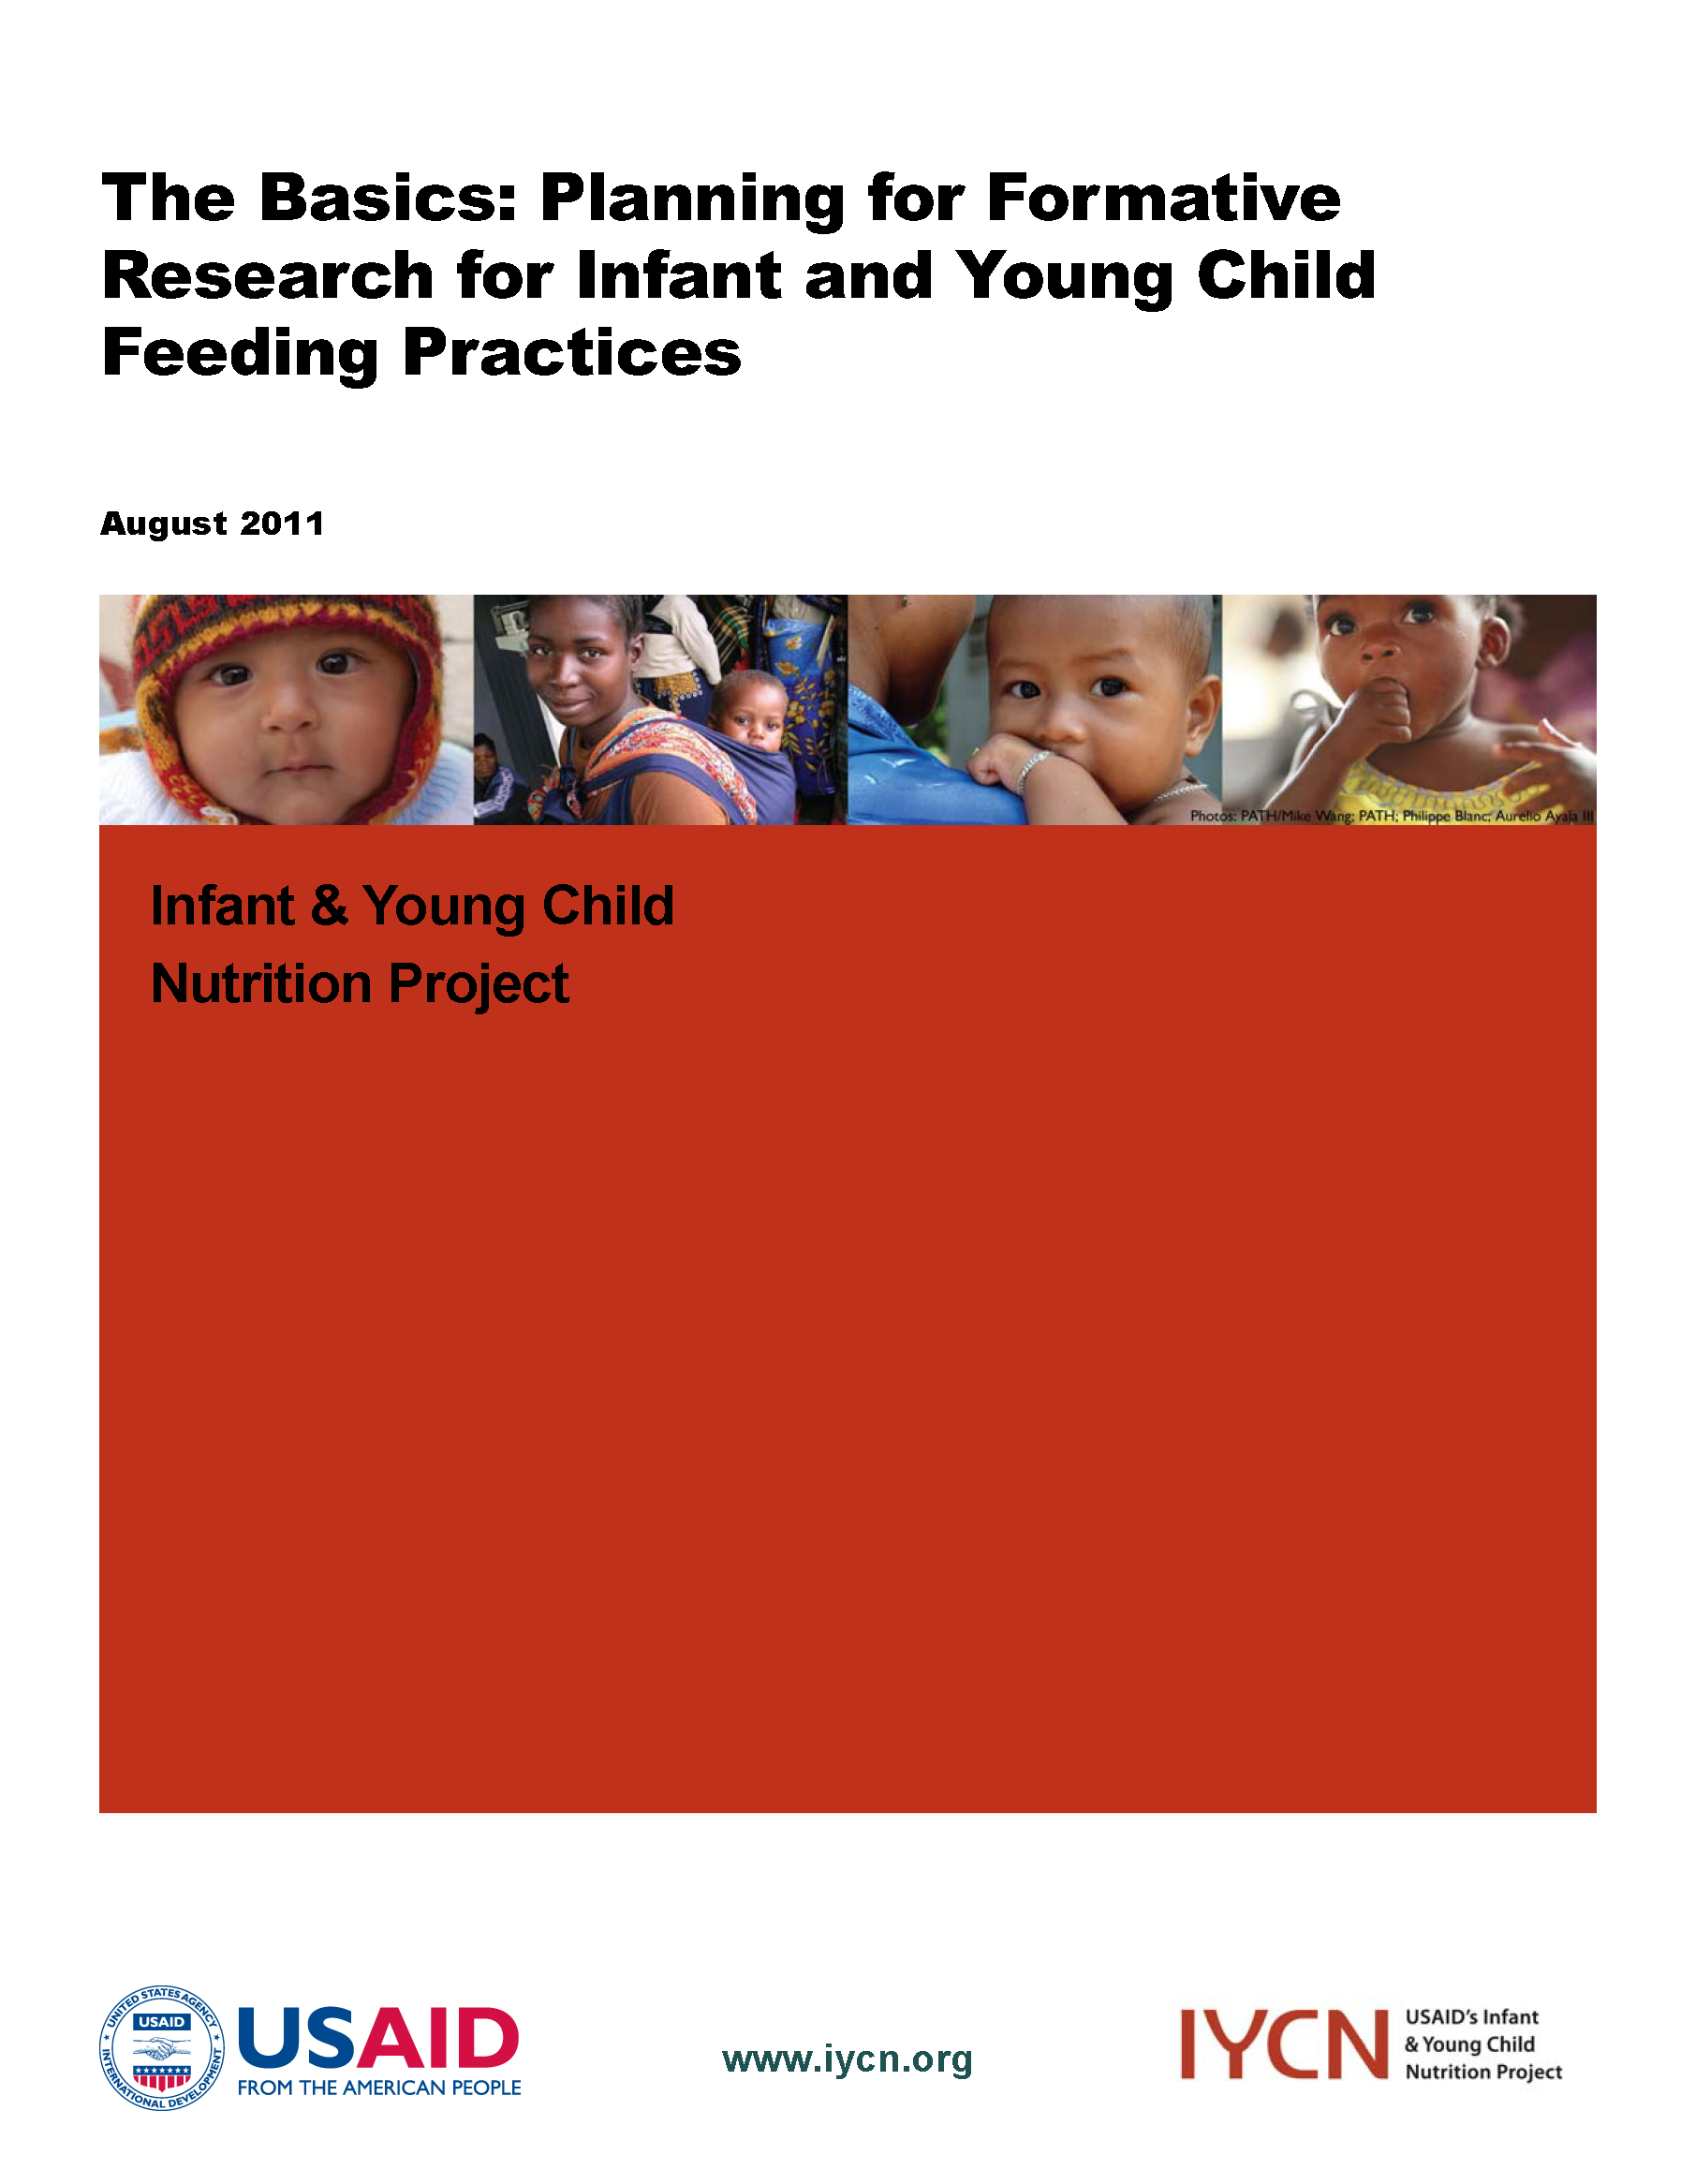 Cover page for The Basics: Planning for Formative Research for Infant and Young Child Feeding Practices